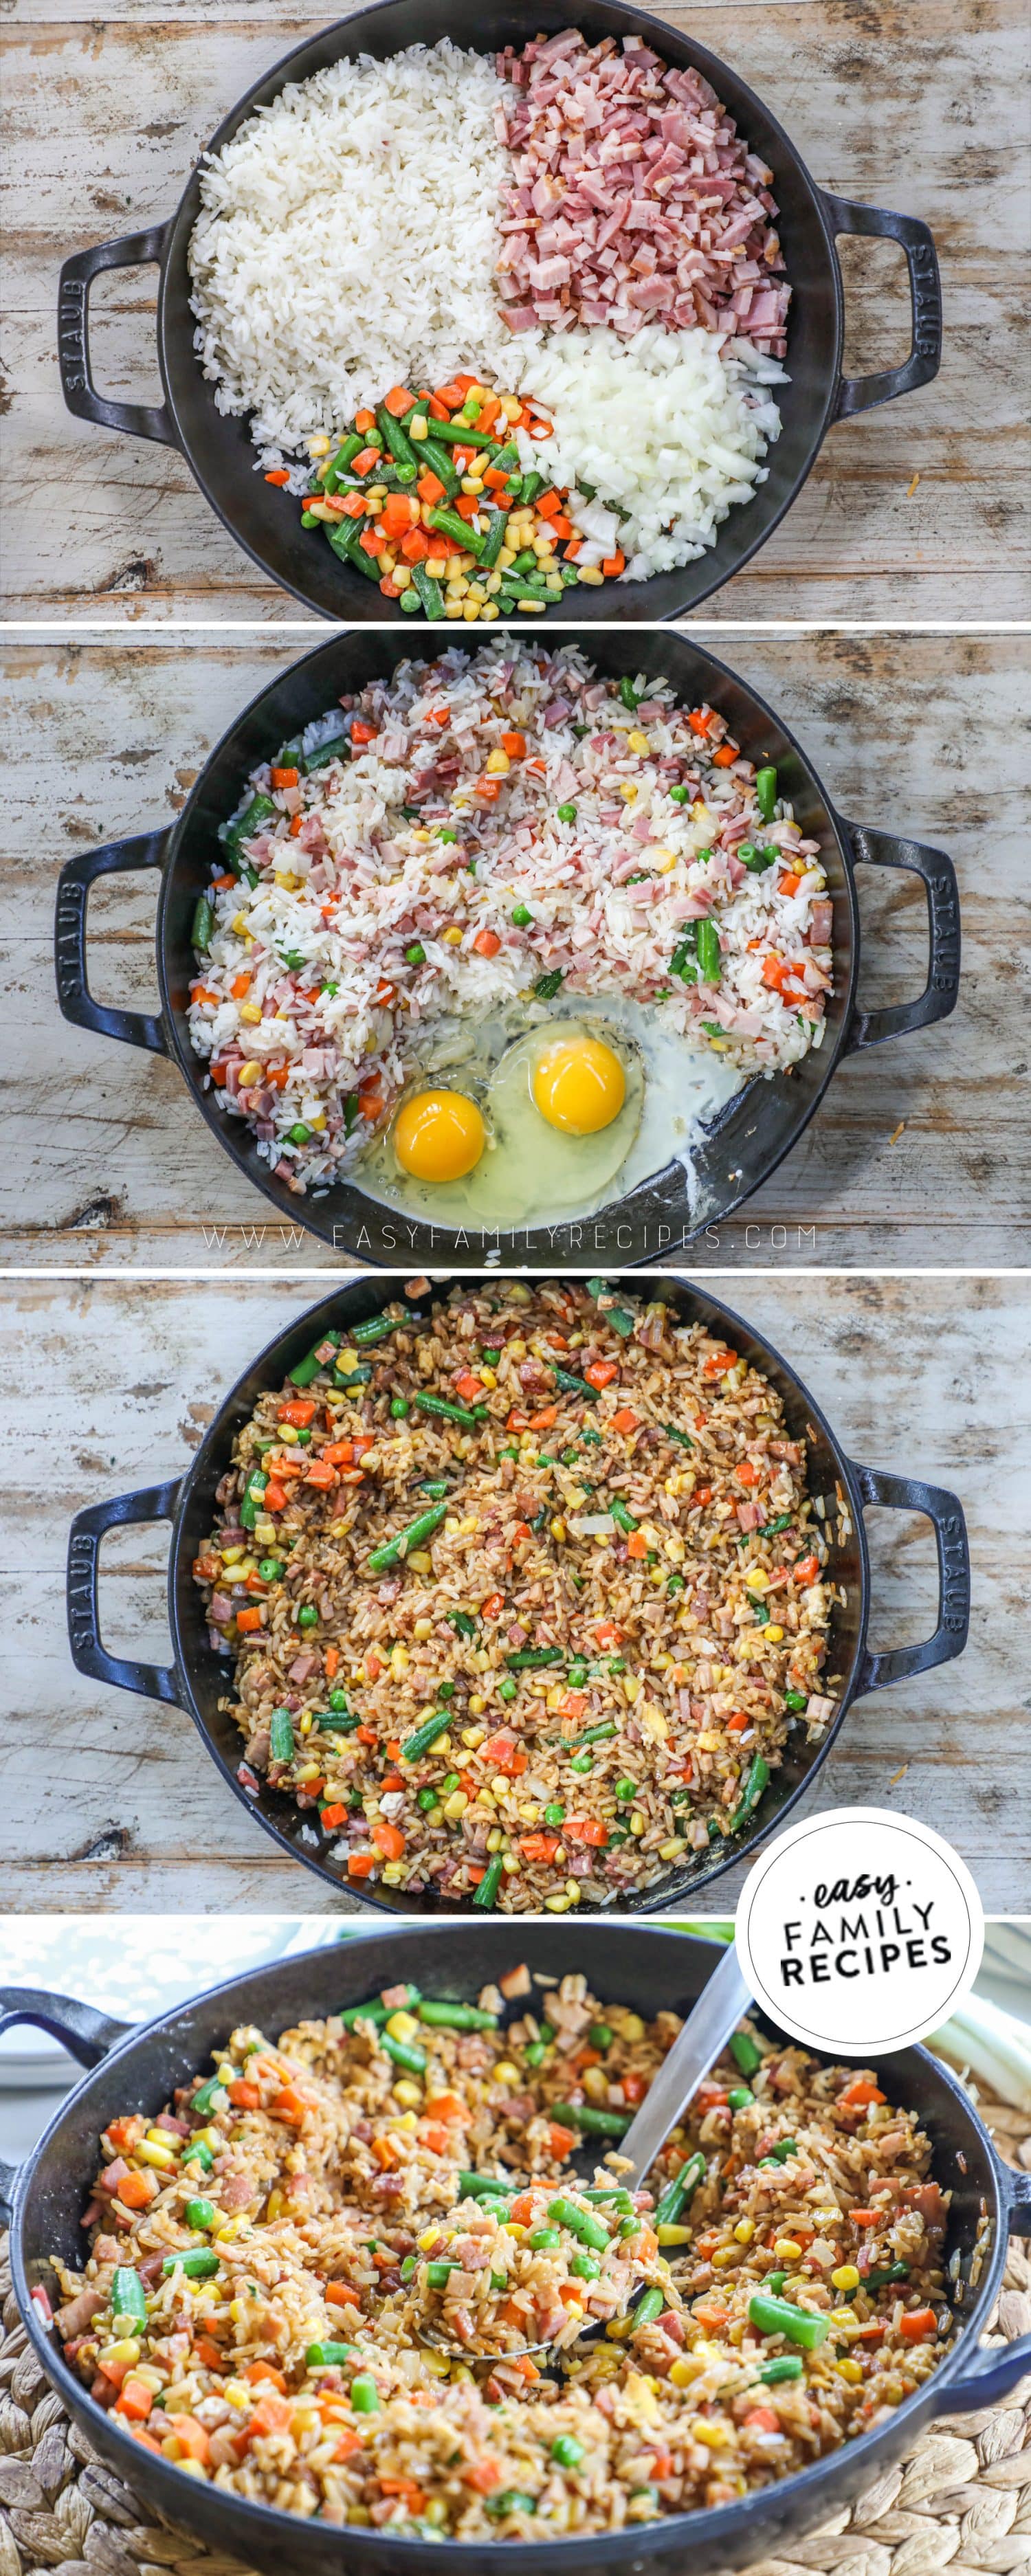 how to make ham fried rice 1)add veggies, rice, ham, and onion to a pot, 2)mix and add egg, 3)fry and combine, 4)serve!